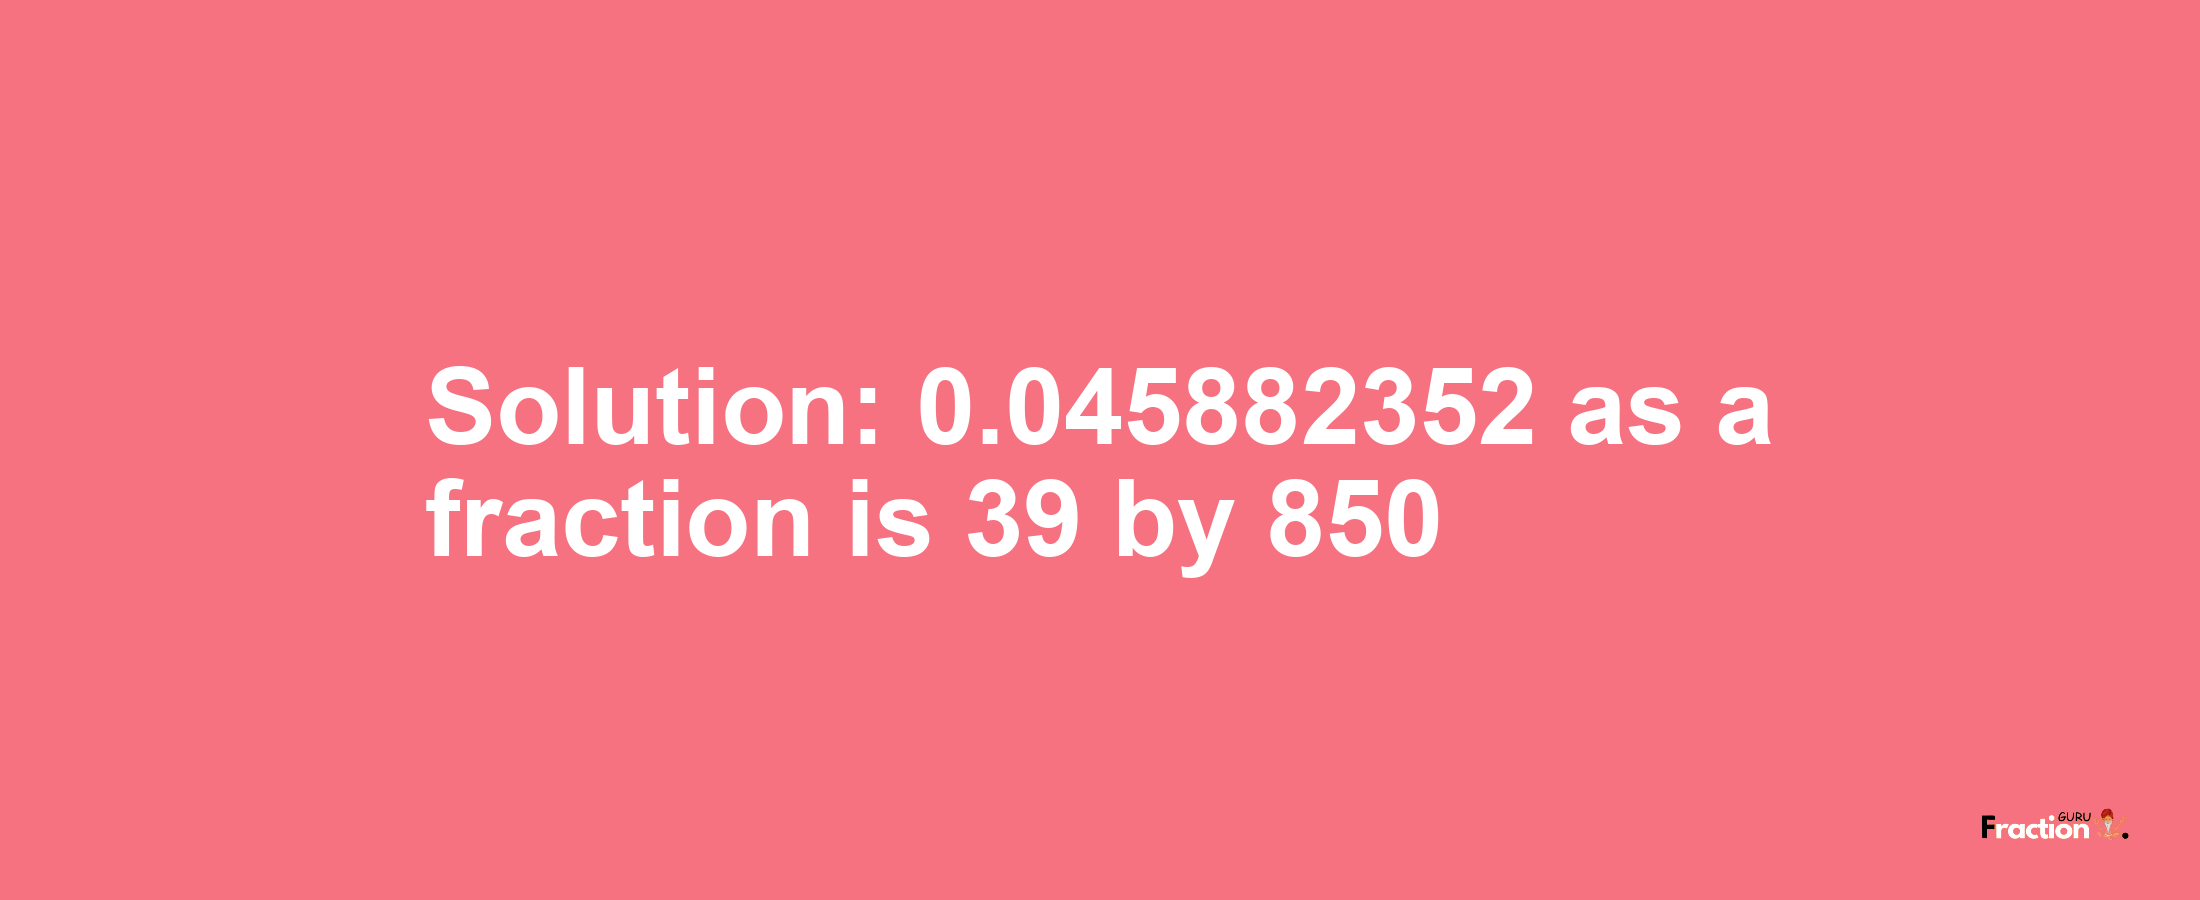 Solution:0.045882352 as a fraction is 39/850